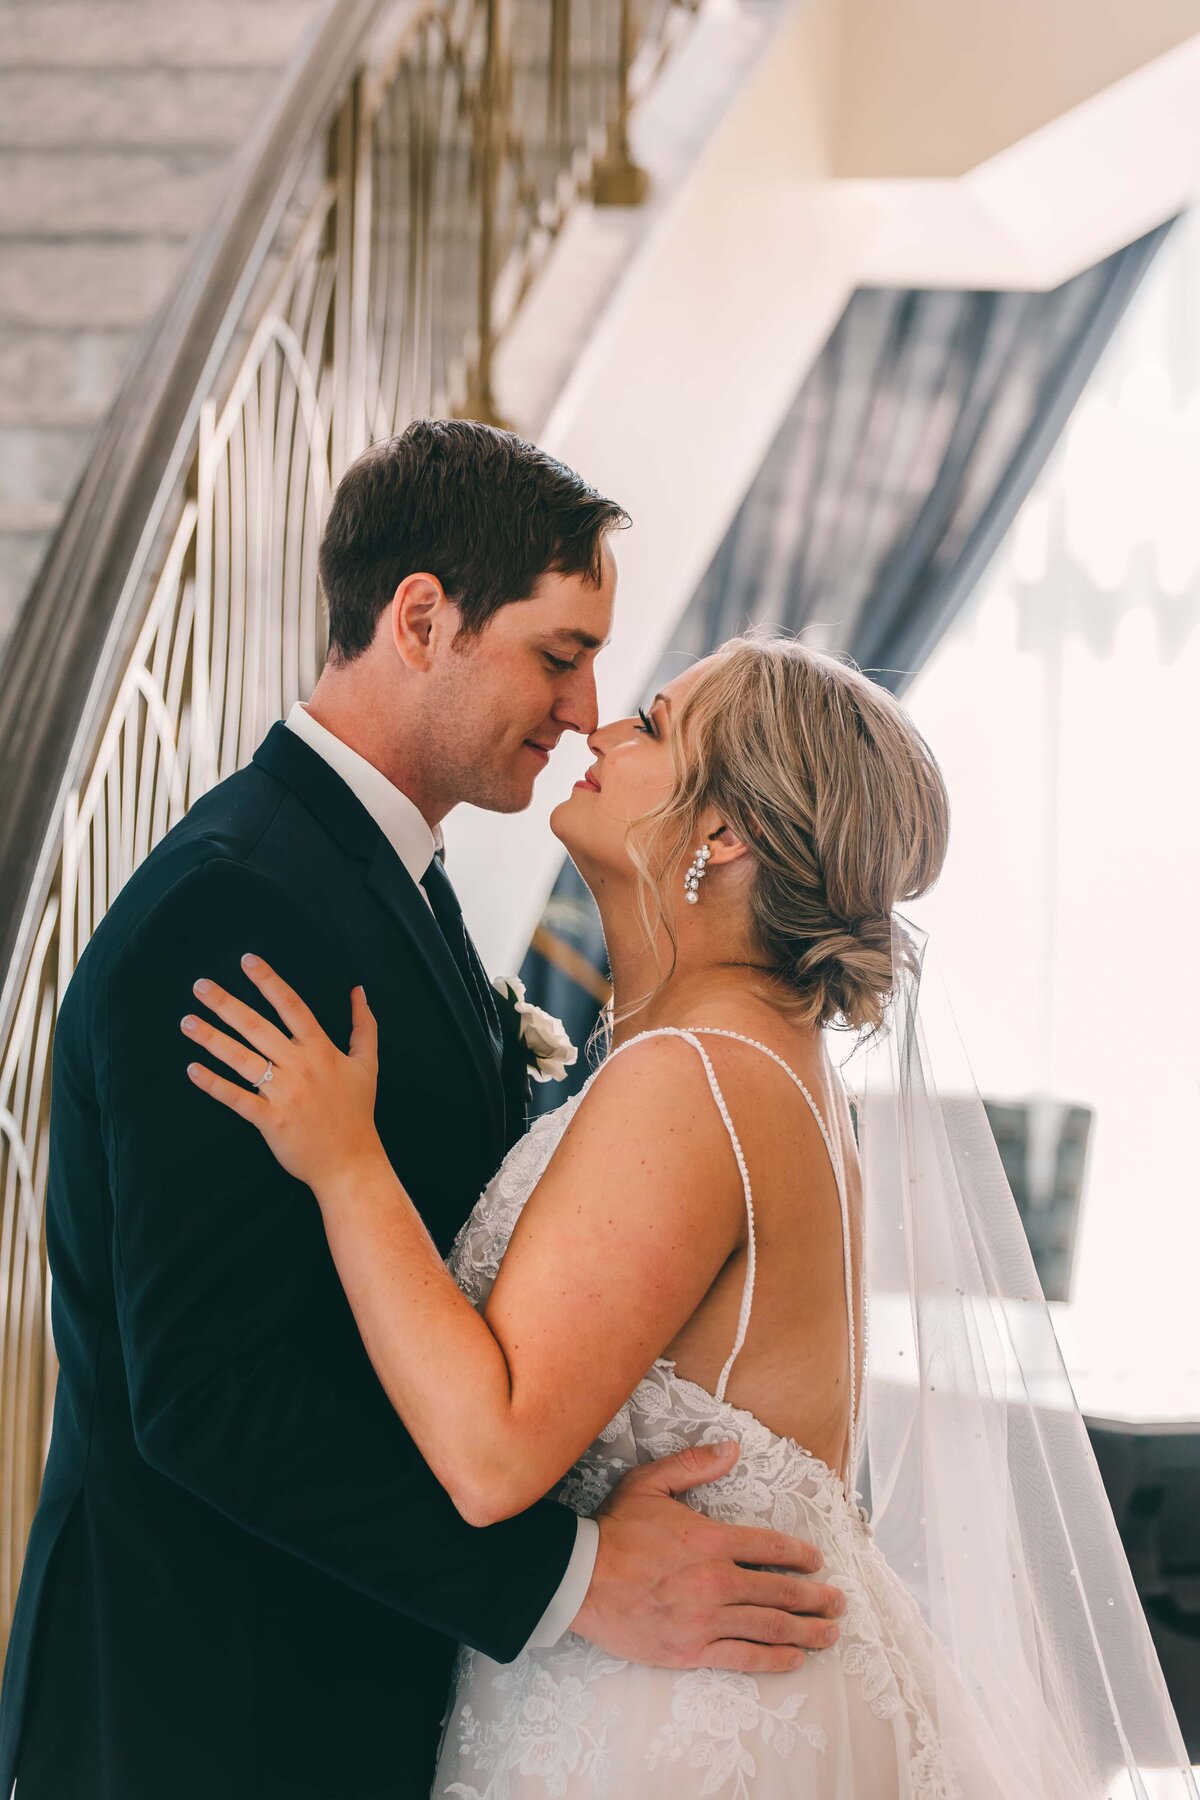 A bride and groom kissing tenderly, with the bride's hand on the groom's cheek, inside a well-lit room at an Iowa wedding with a staircase behind them.